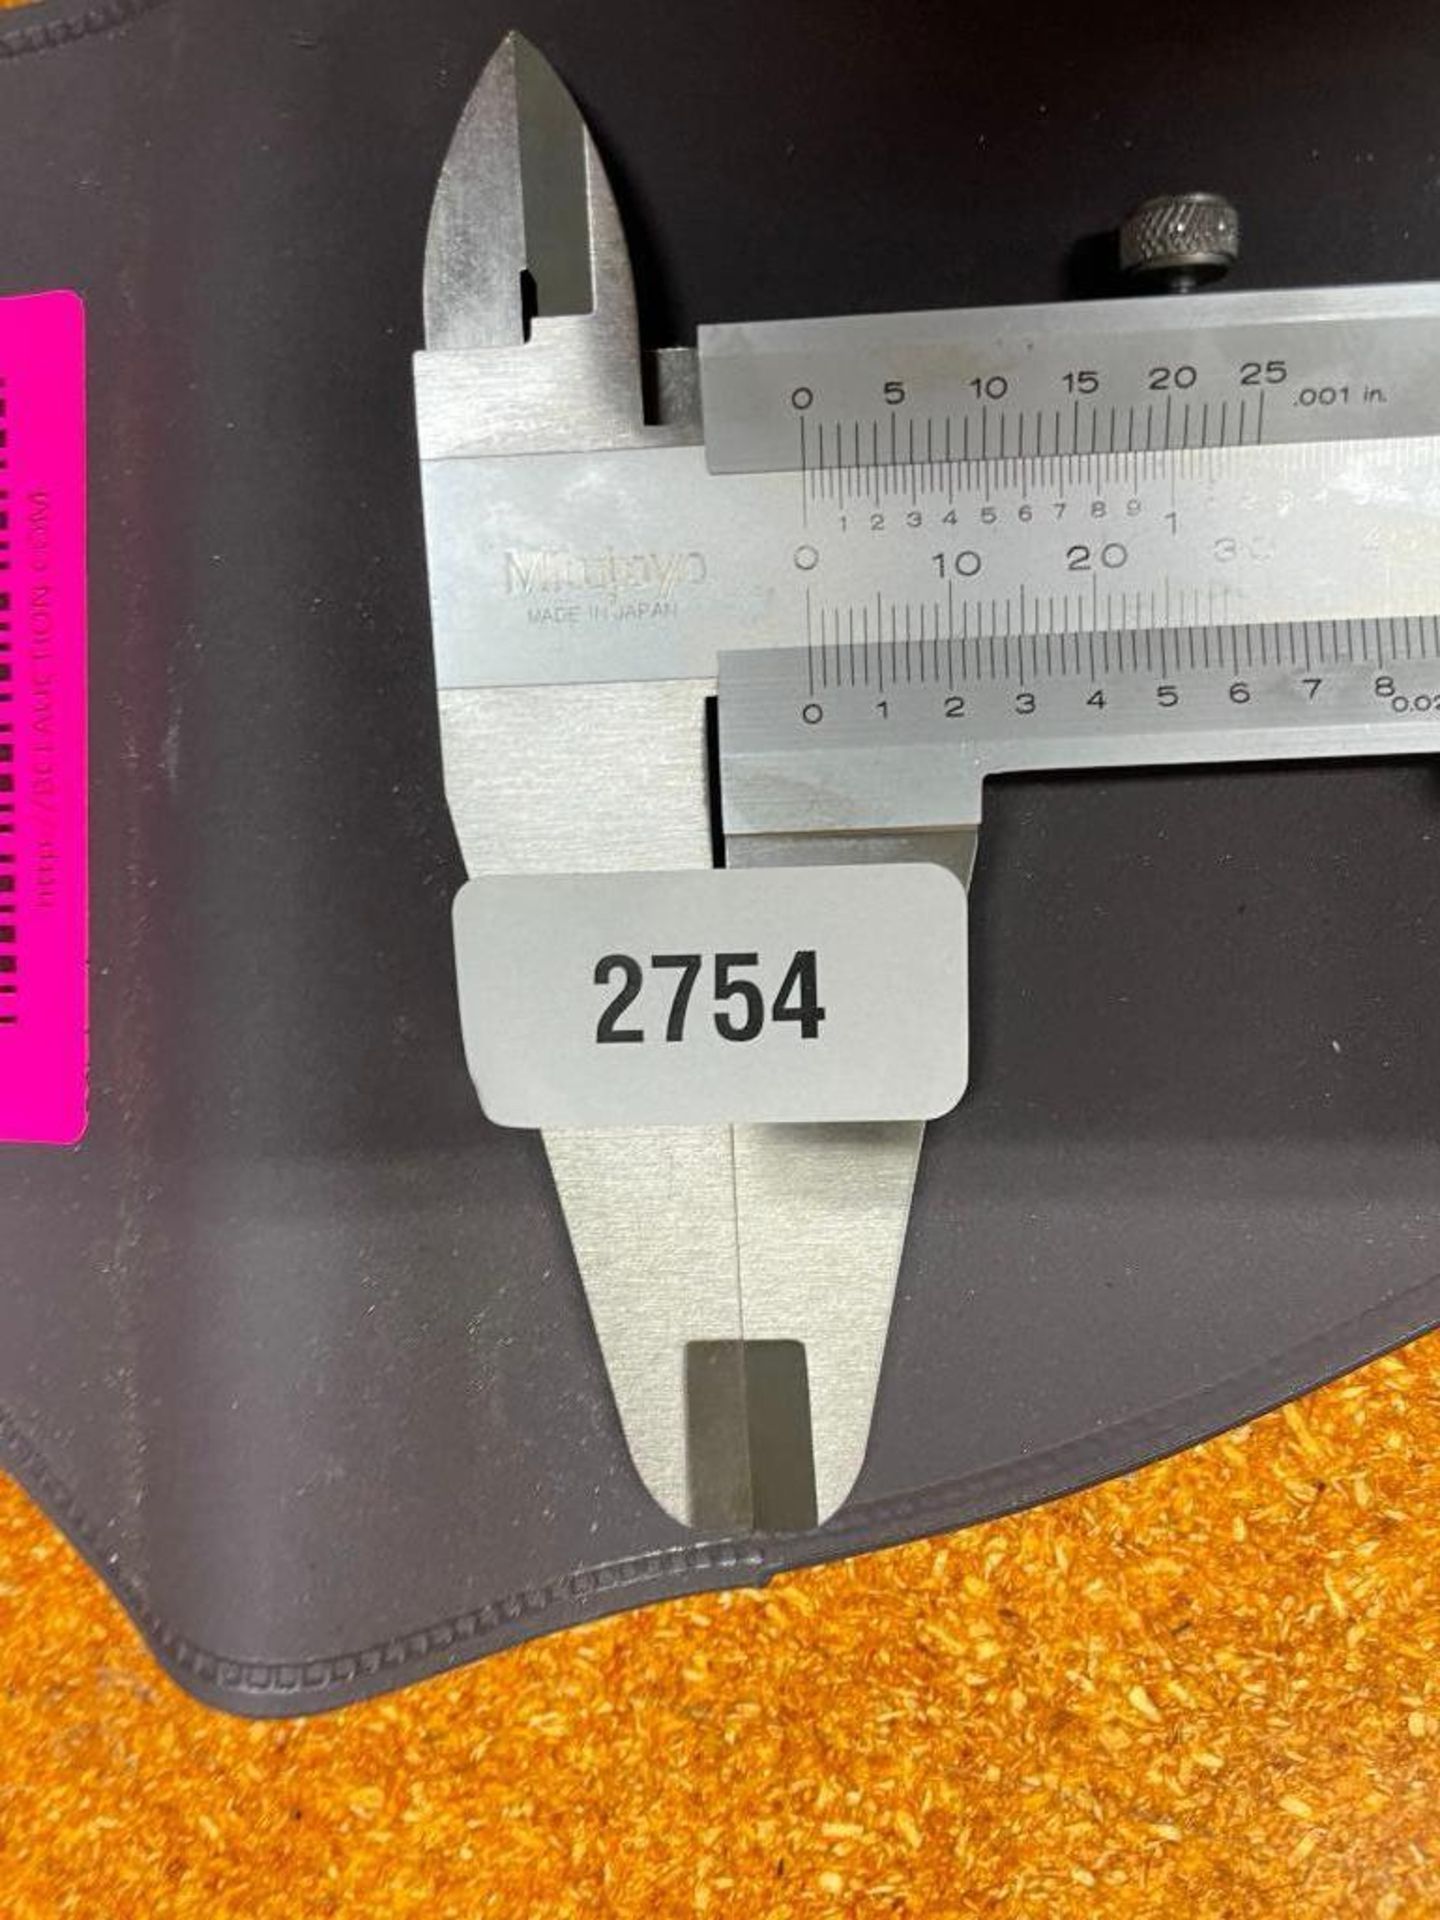 12" VERNIER CALIPER WITH CASE BRAND/MODEL: MITUTOYO QTY: 1 - Image 3 of 3